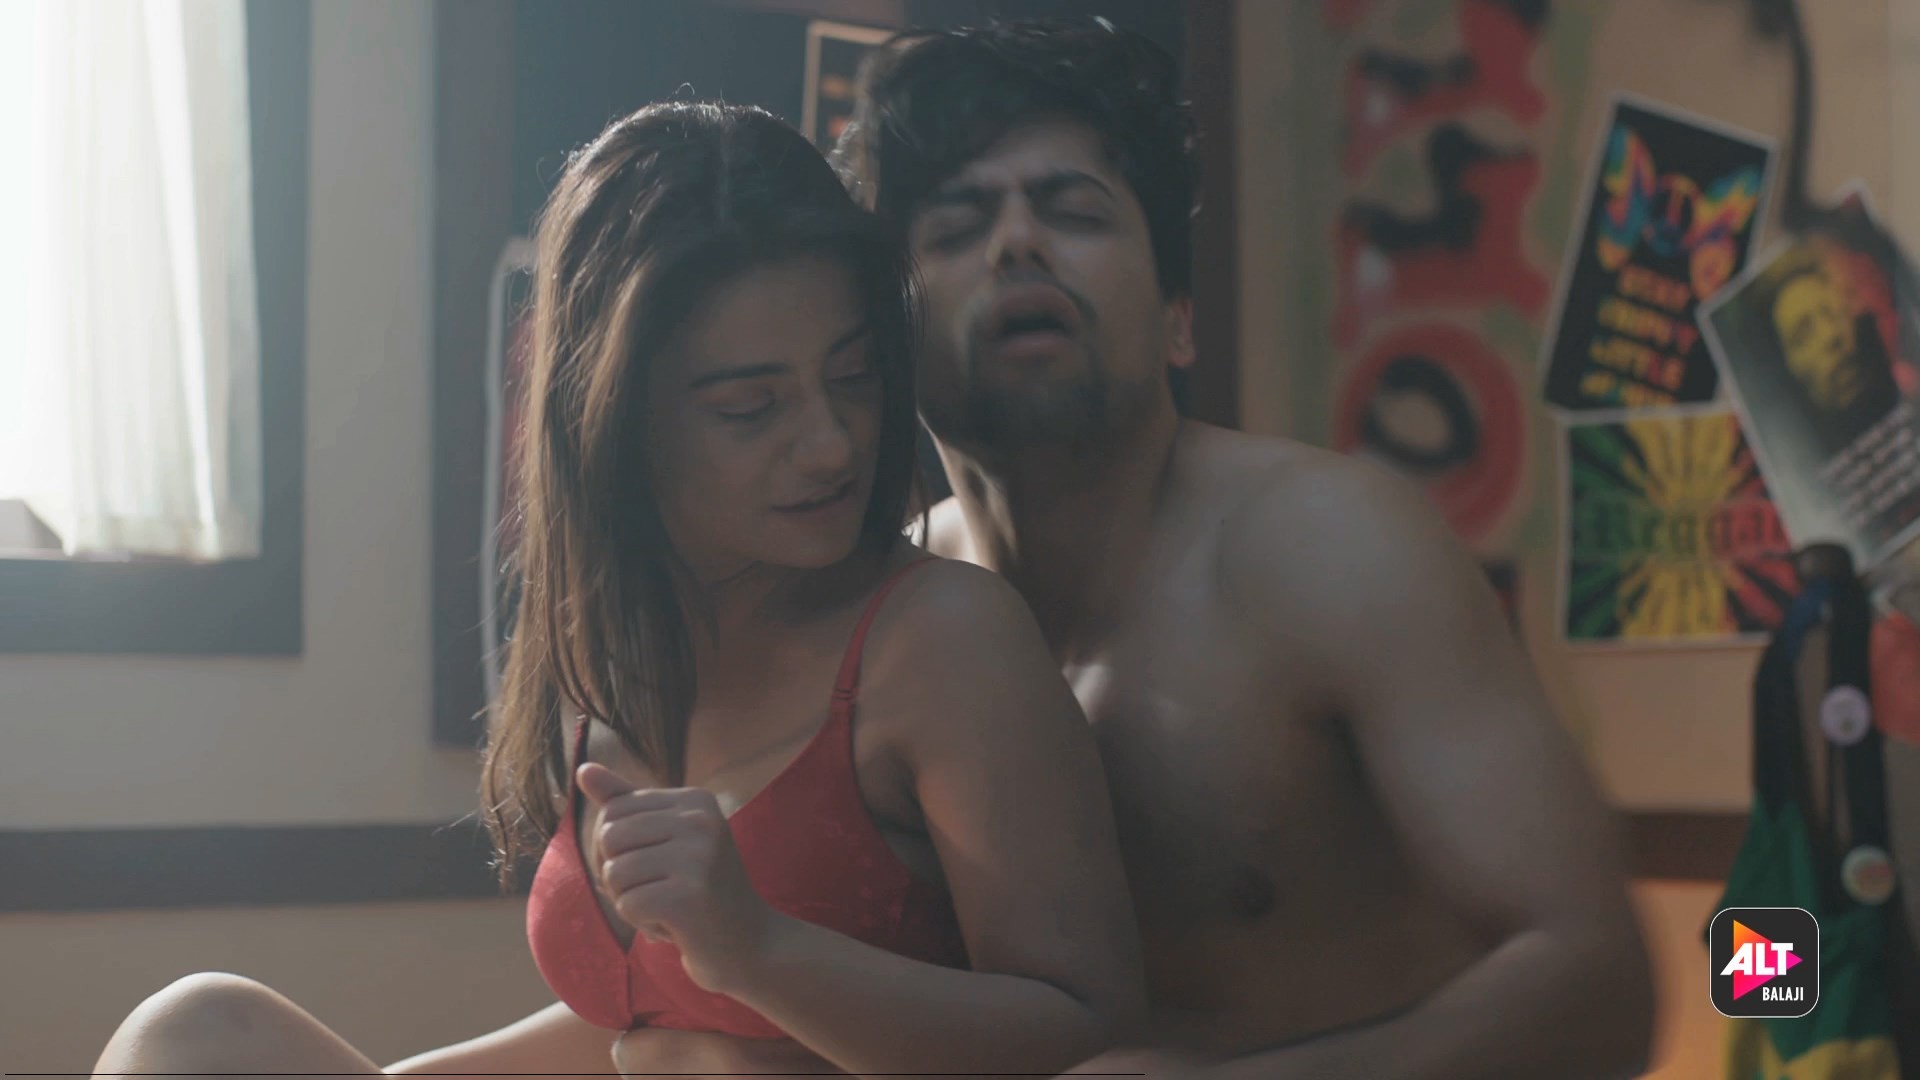 18+ Medically Yourrs (2019) S01 Hindi Alt Balaji Complete Web Series 720p H...